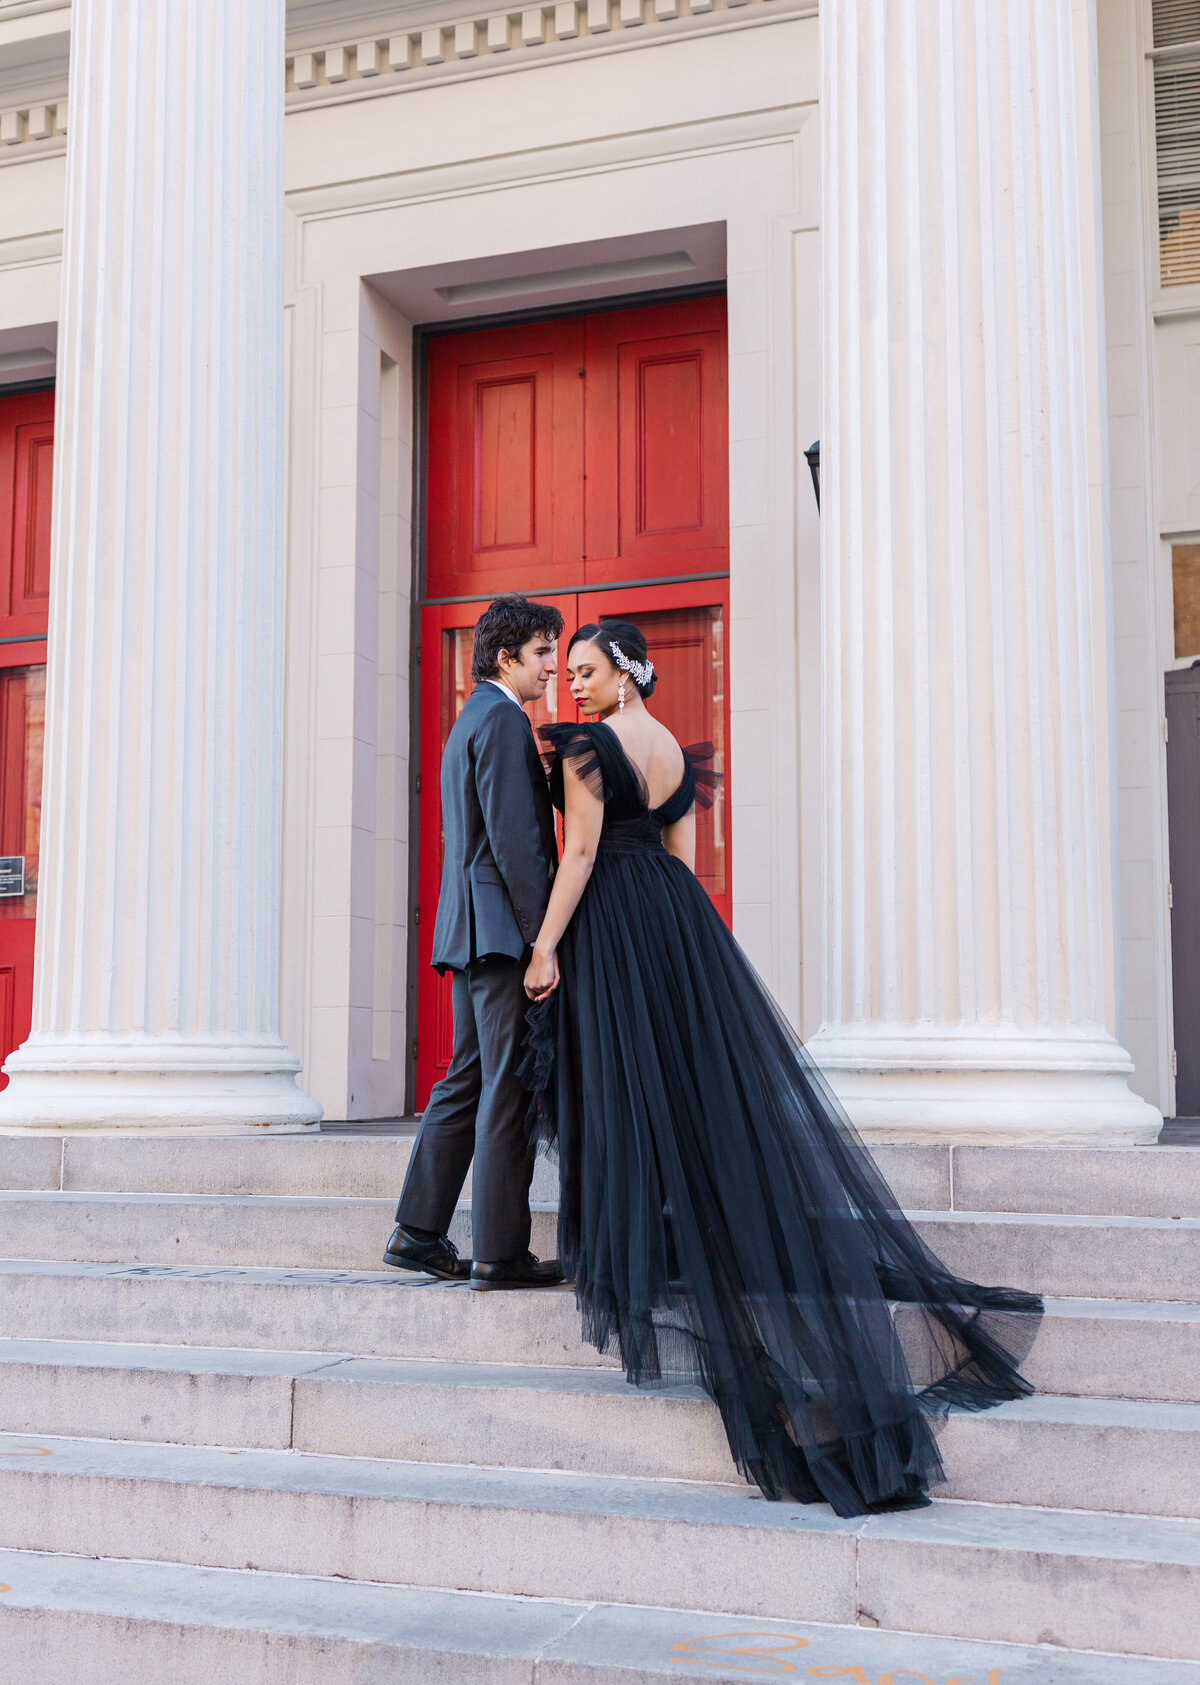 woman wearing black tulle dress and man wearing dark gray suit holding hands on marble steps in front of red door